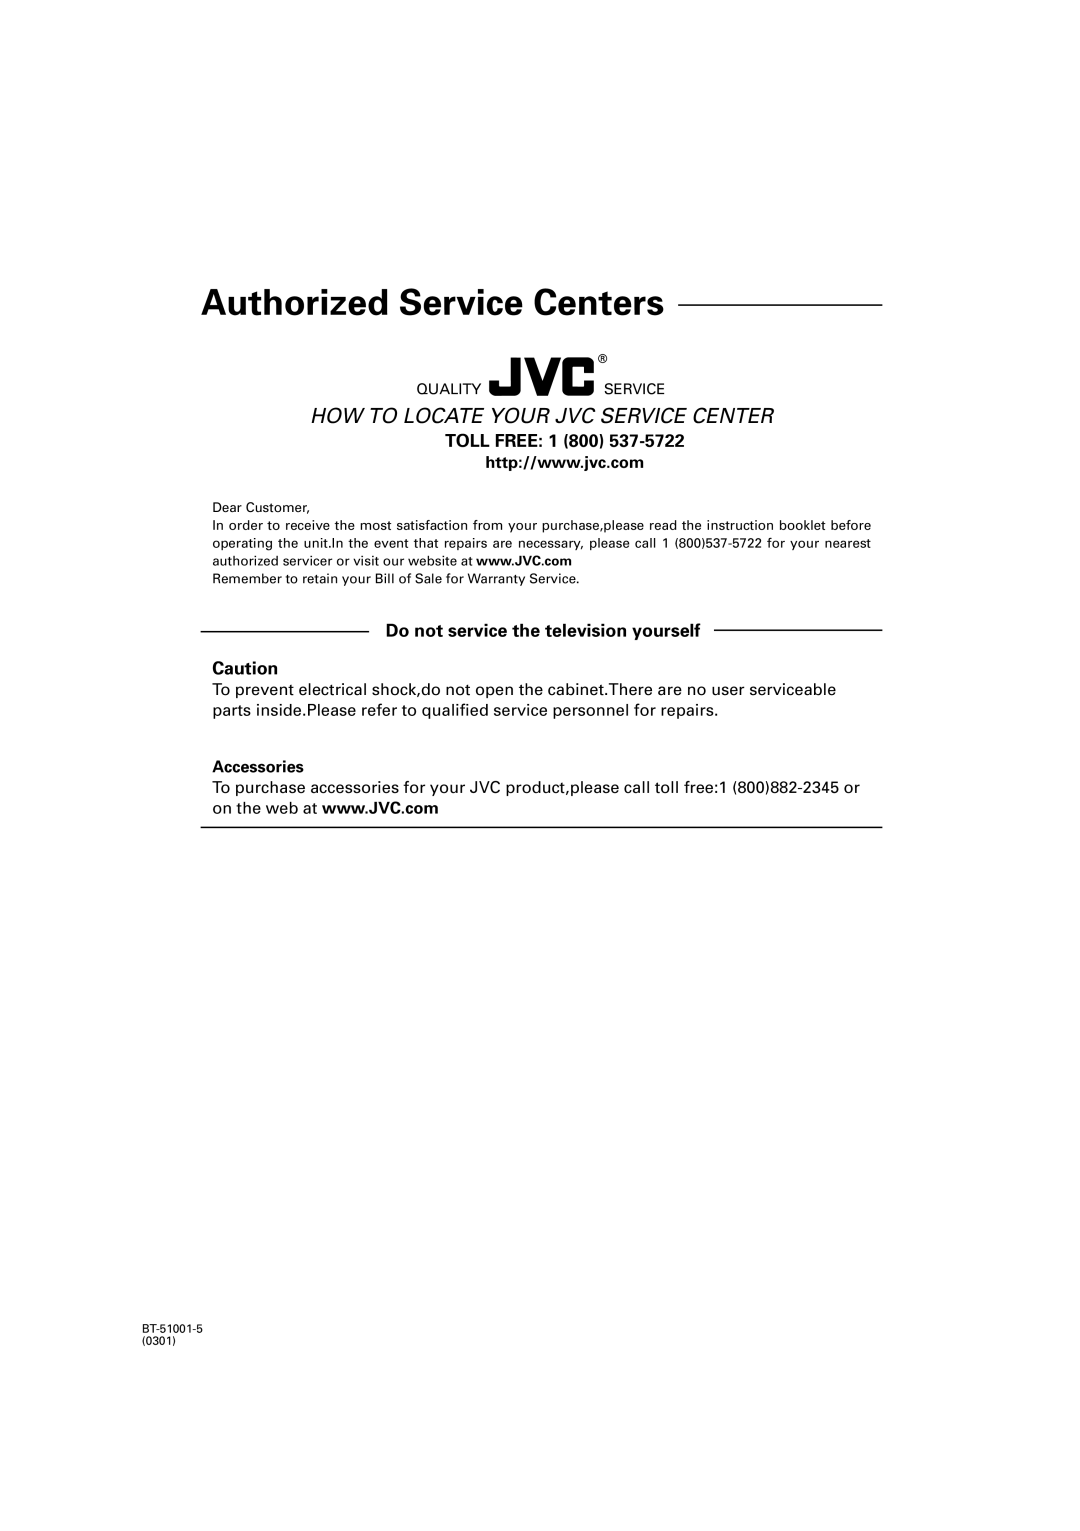 JVC MX-GB5C manual Toll Free, Do not service the television yourself, Authorized Service Centers, Accessories 